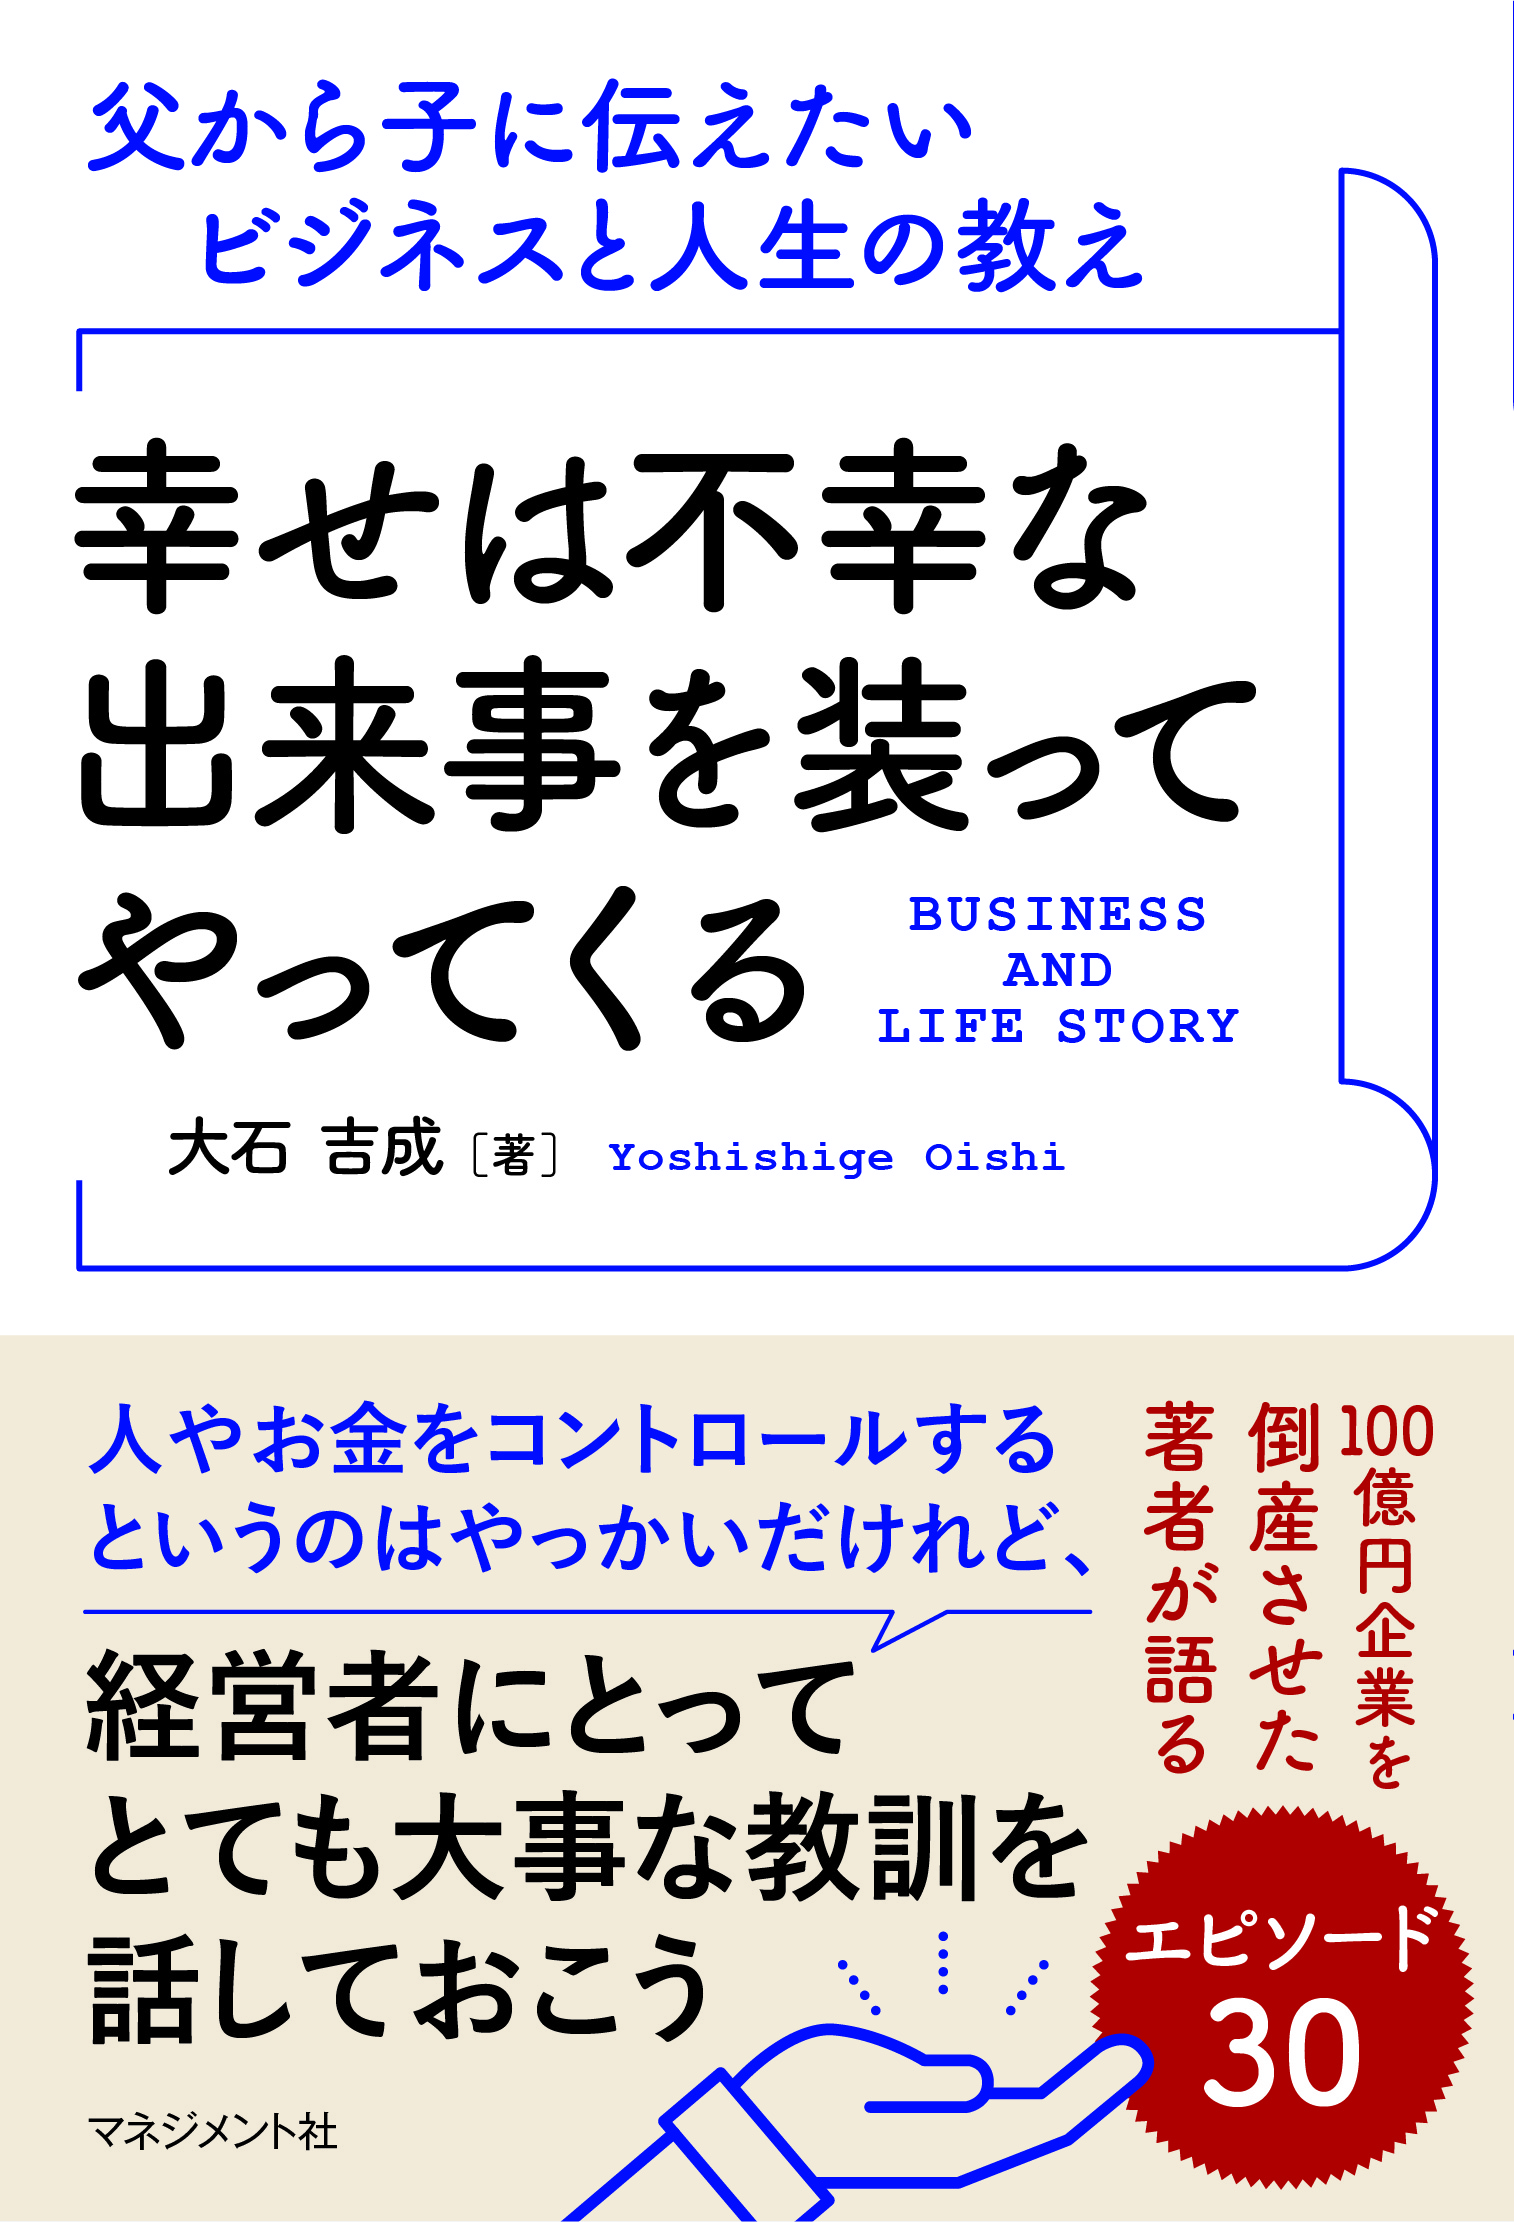 cover-business-h1